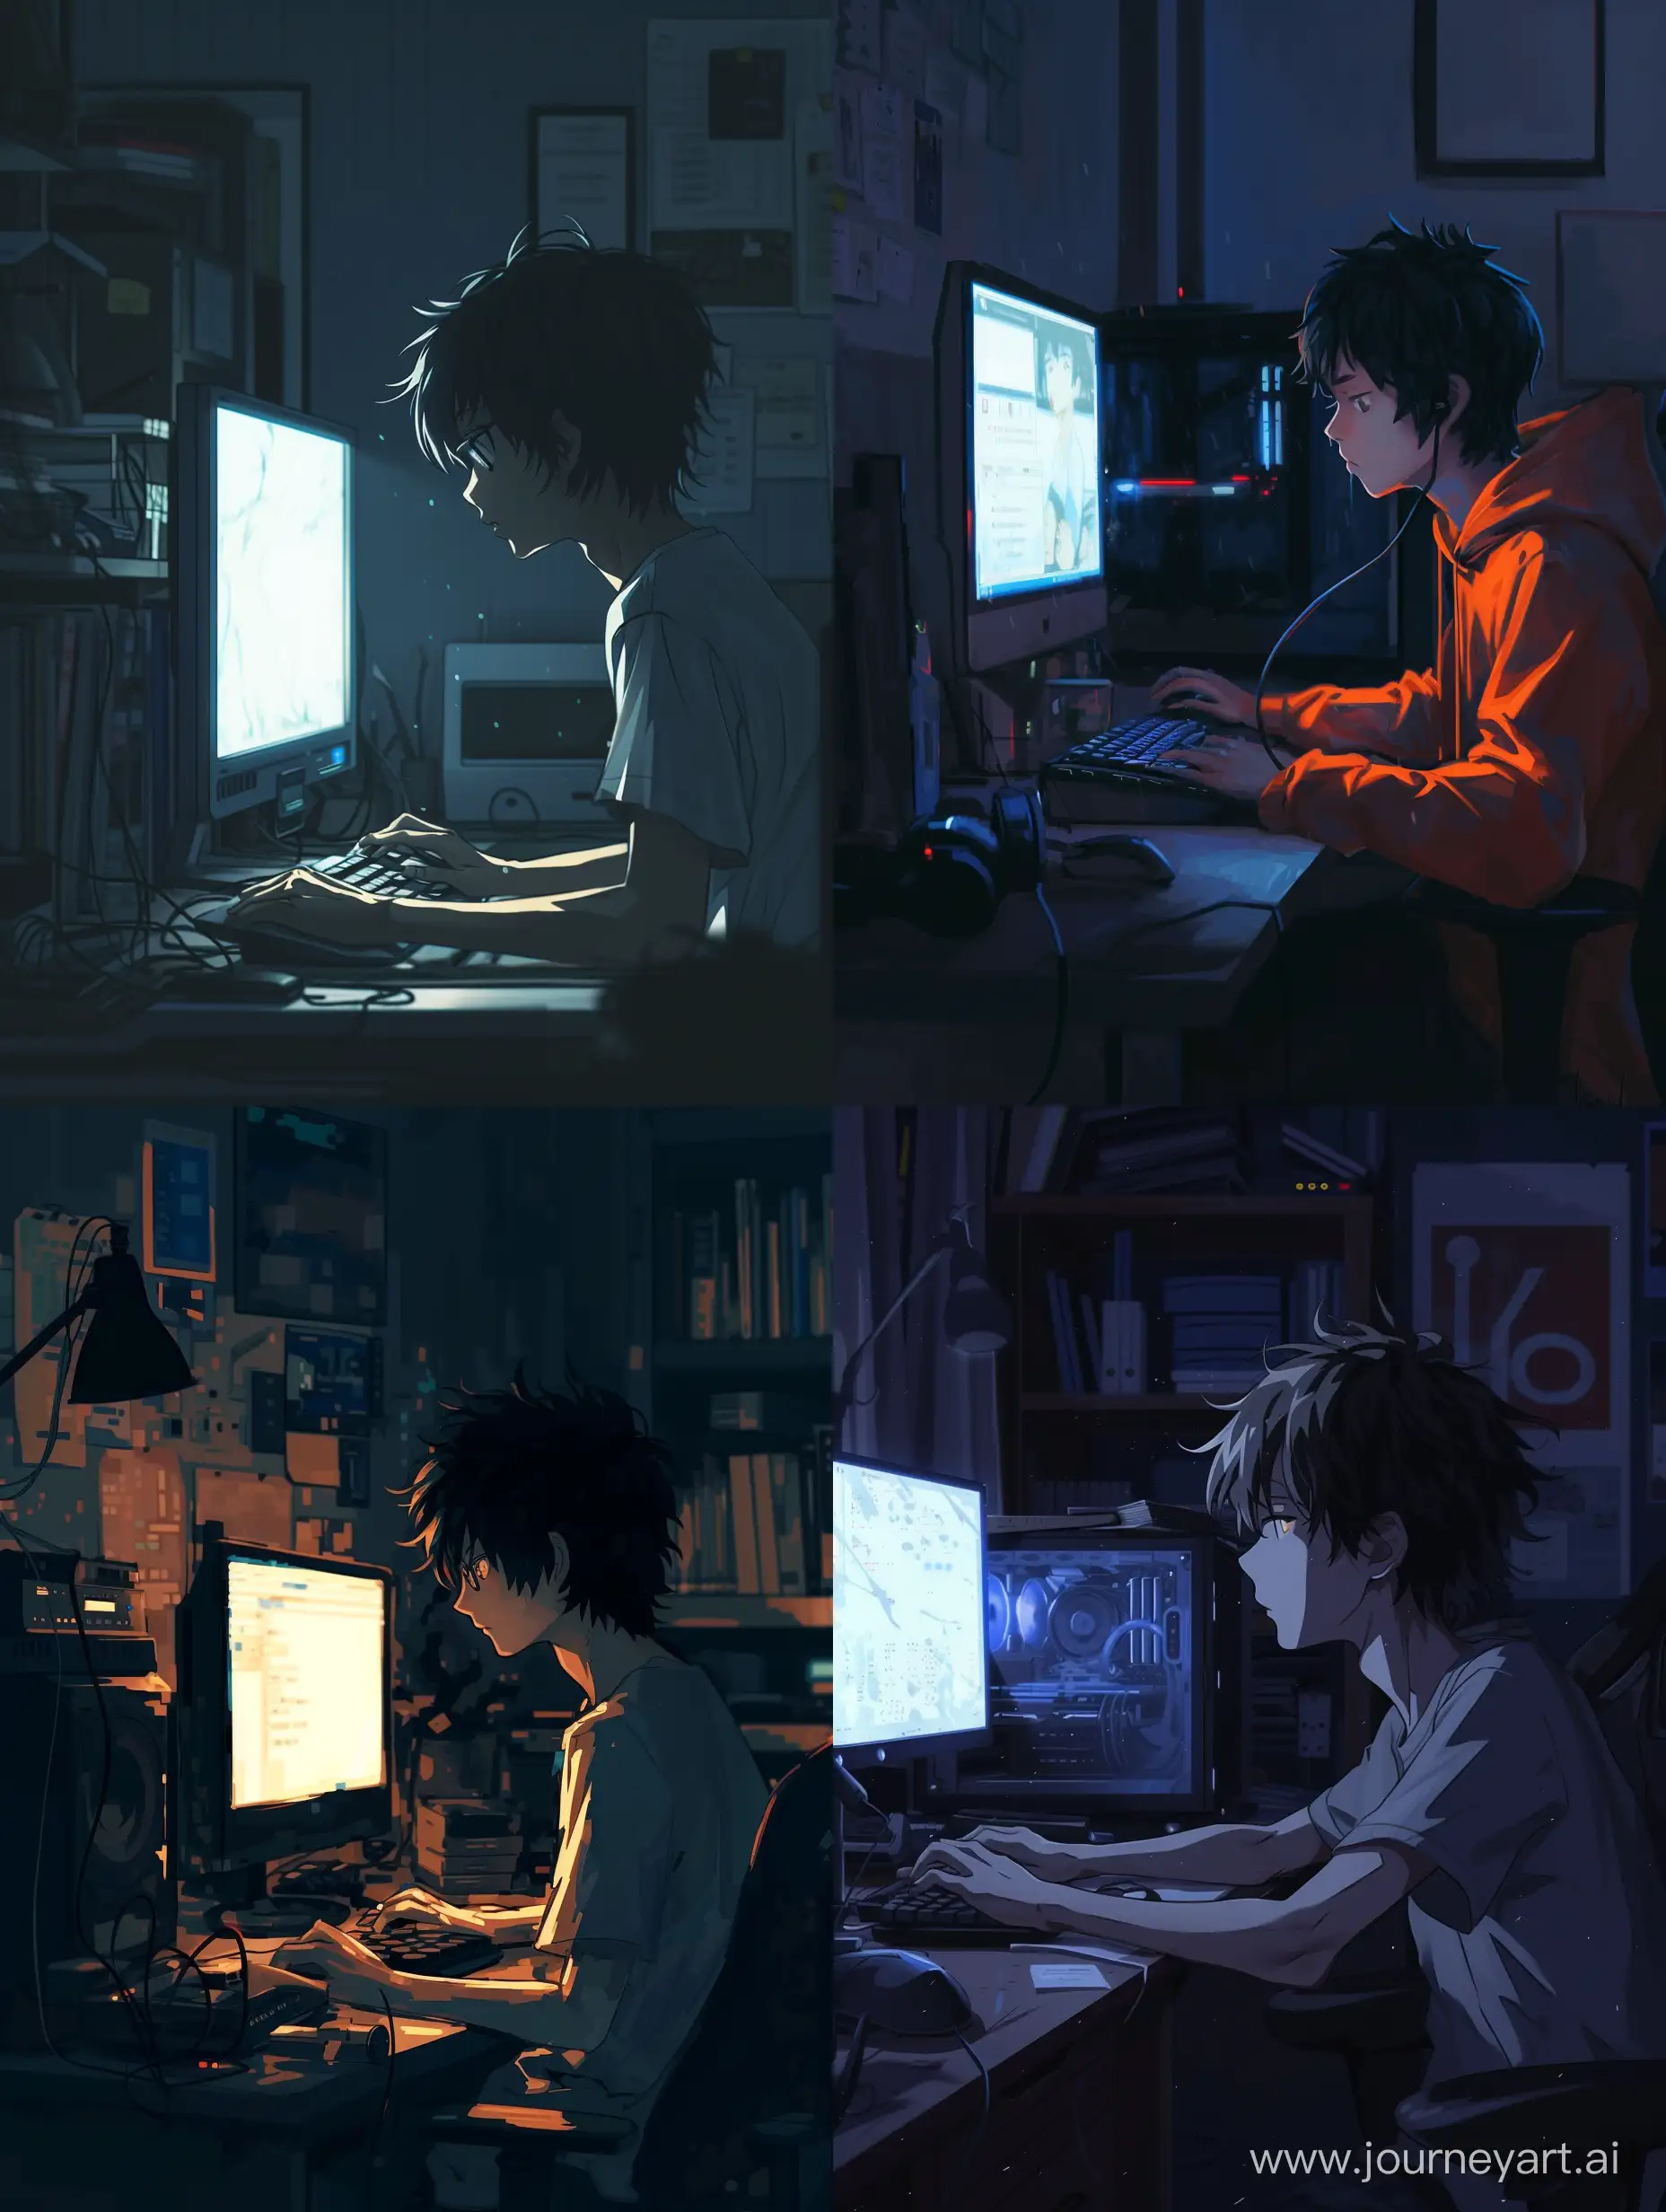 Teenage-Tech-Enthusiast-in-AnimeStyled-Dark-Room-with-Computer